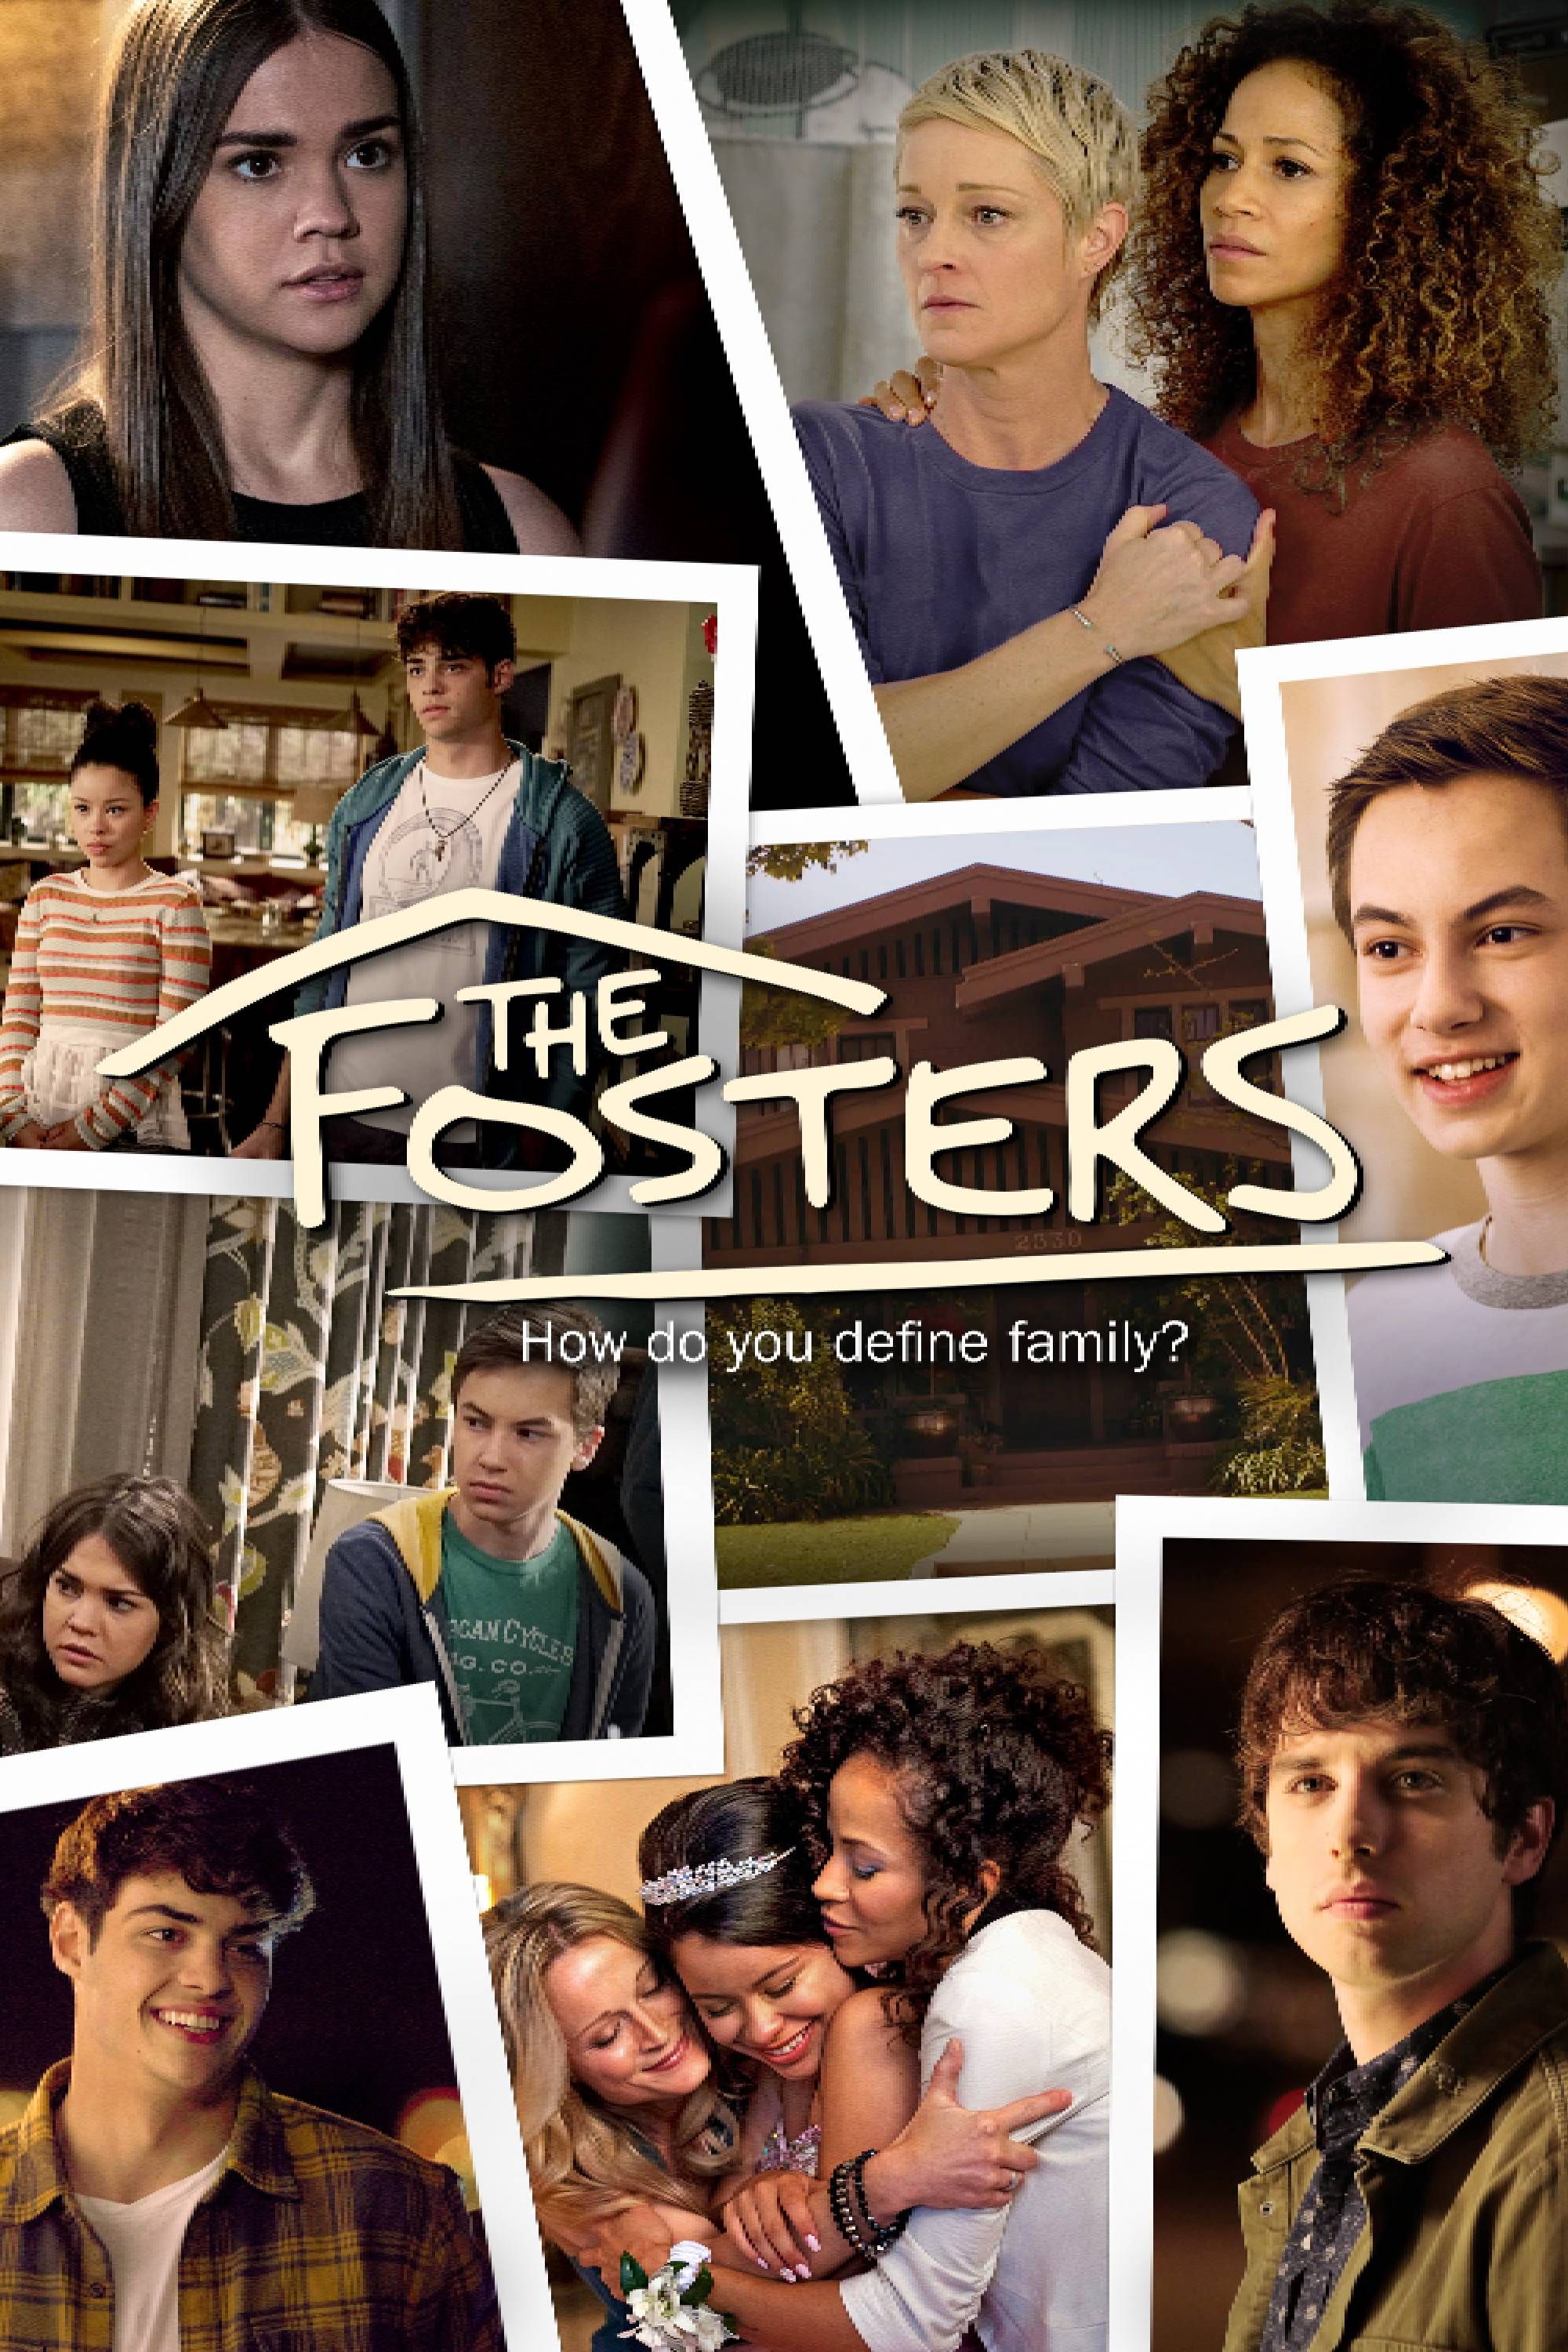 The Fosters, ABC Family